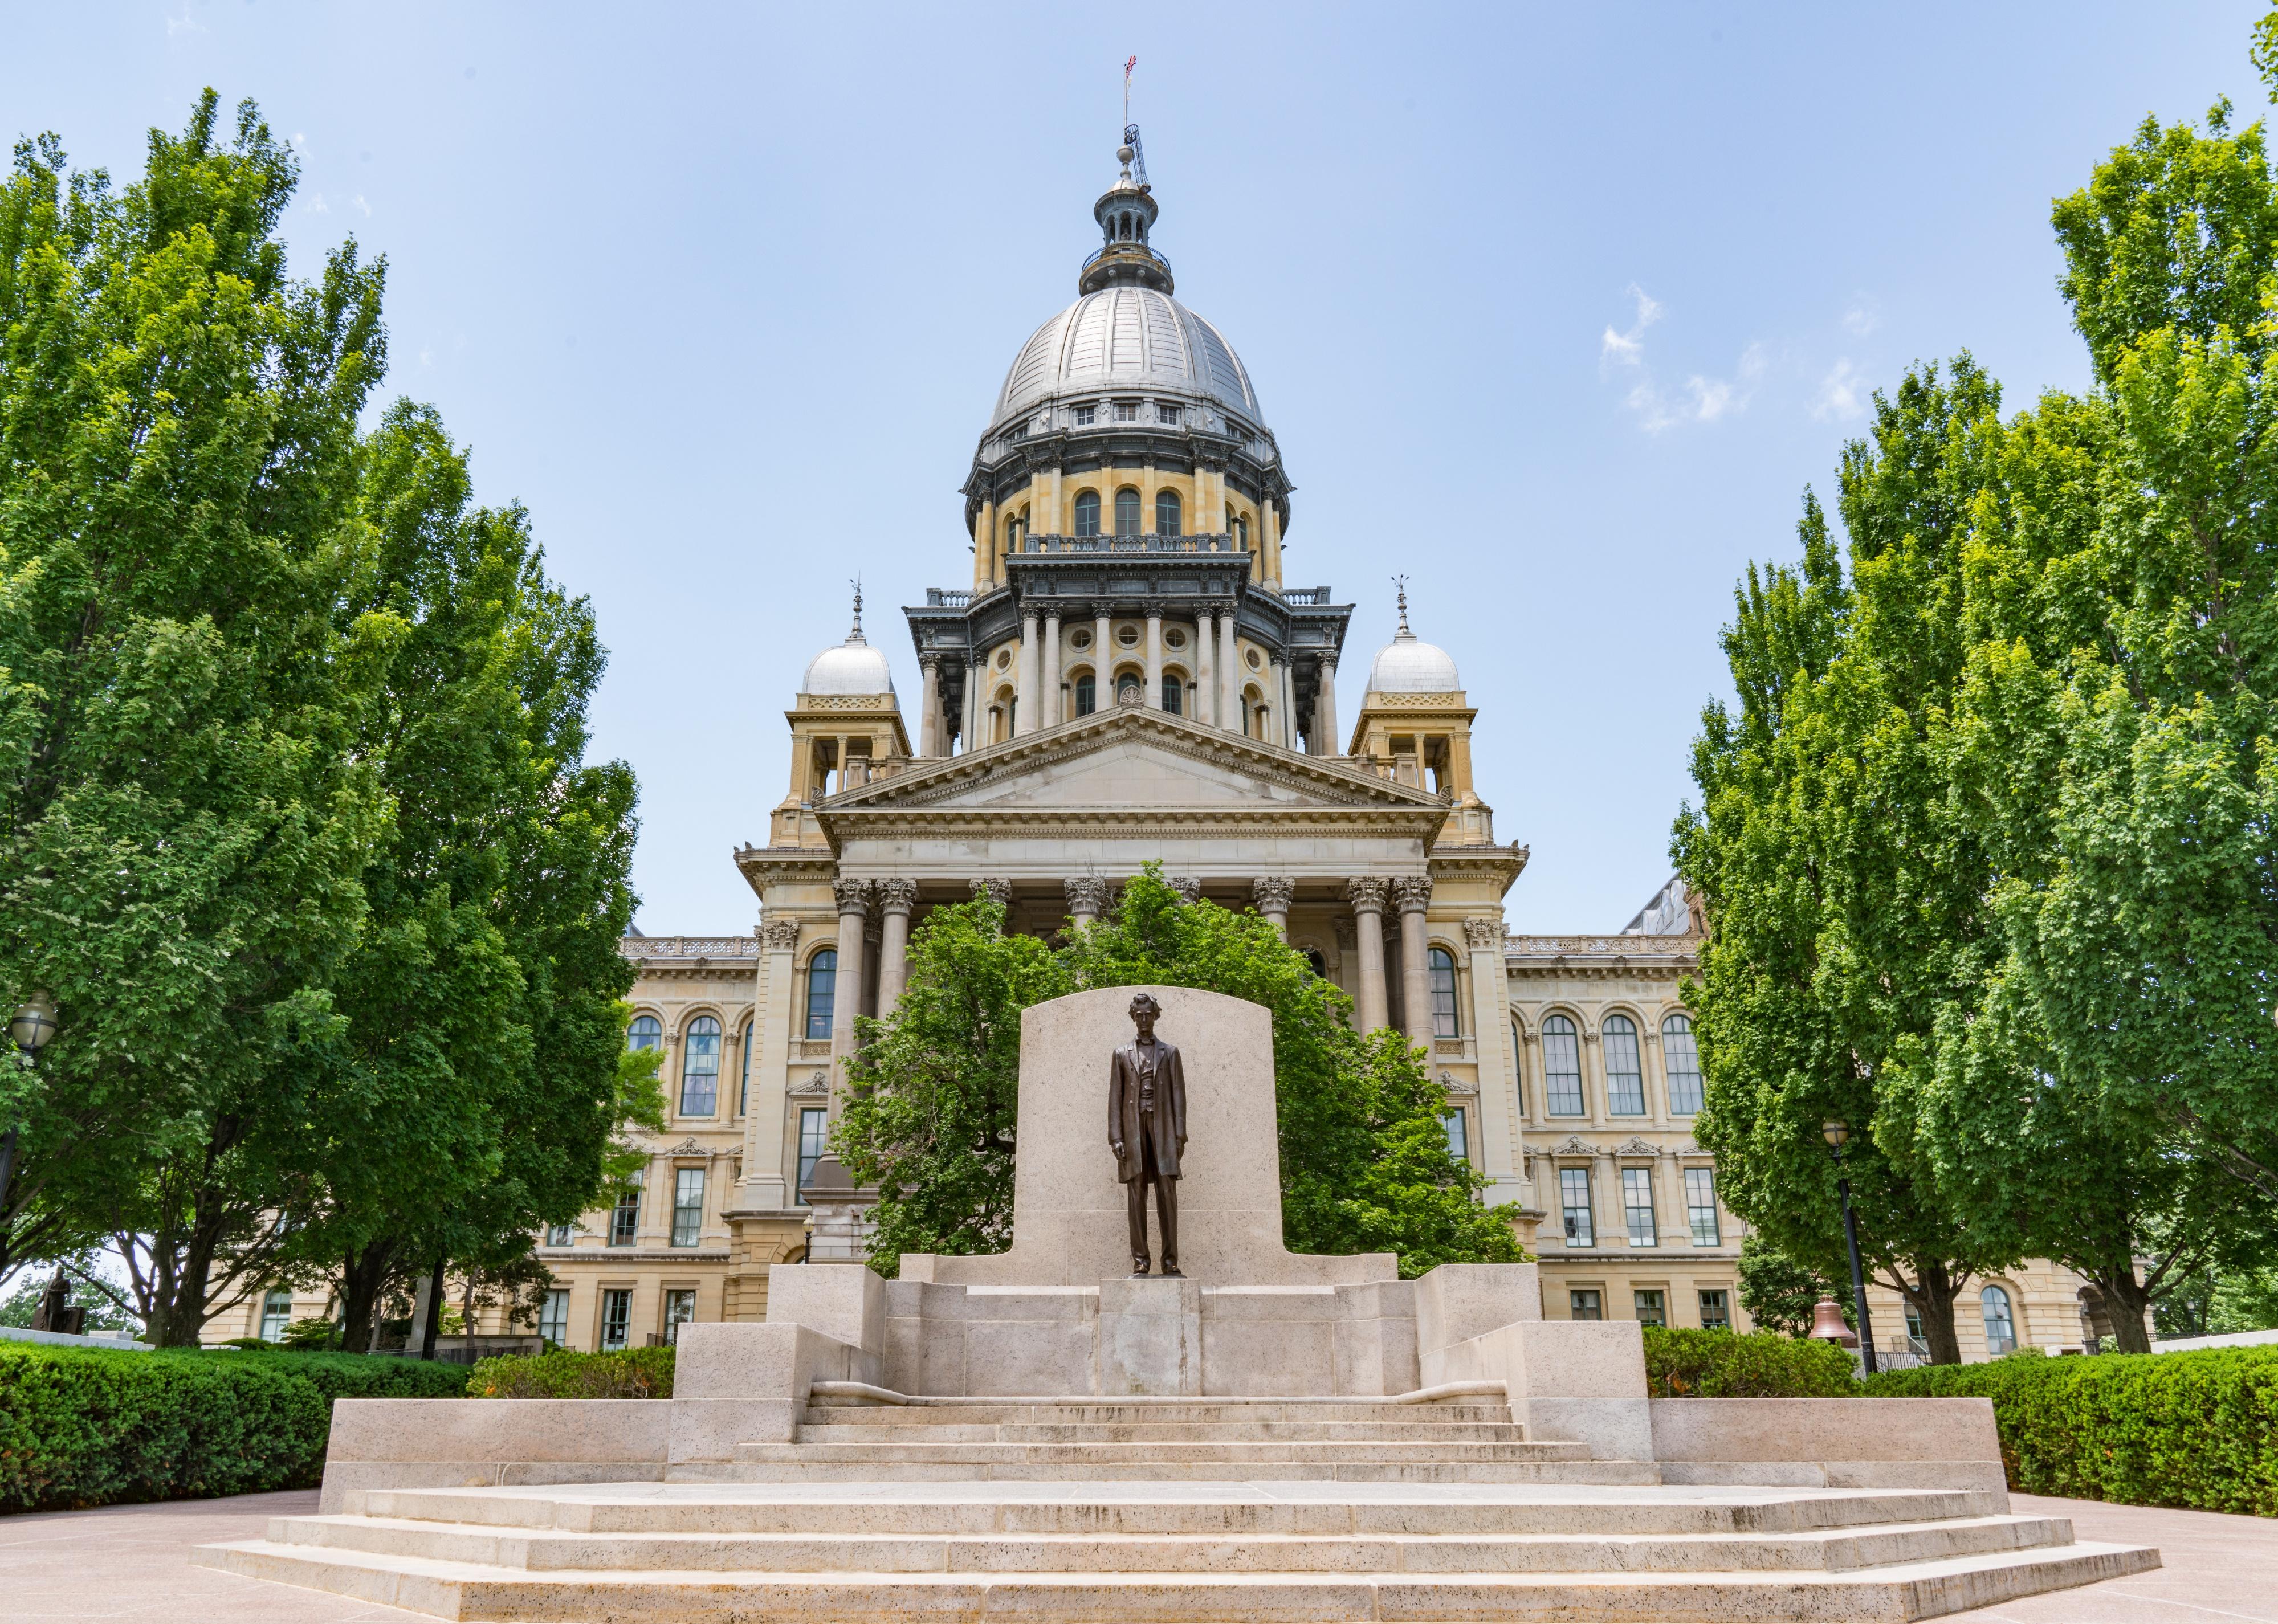 Abraham Lincoln statue in front of the Illinois State Capital Building